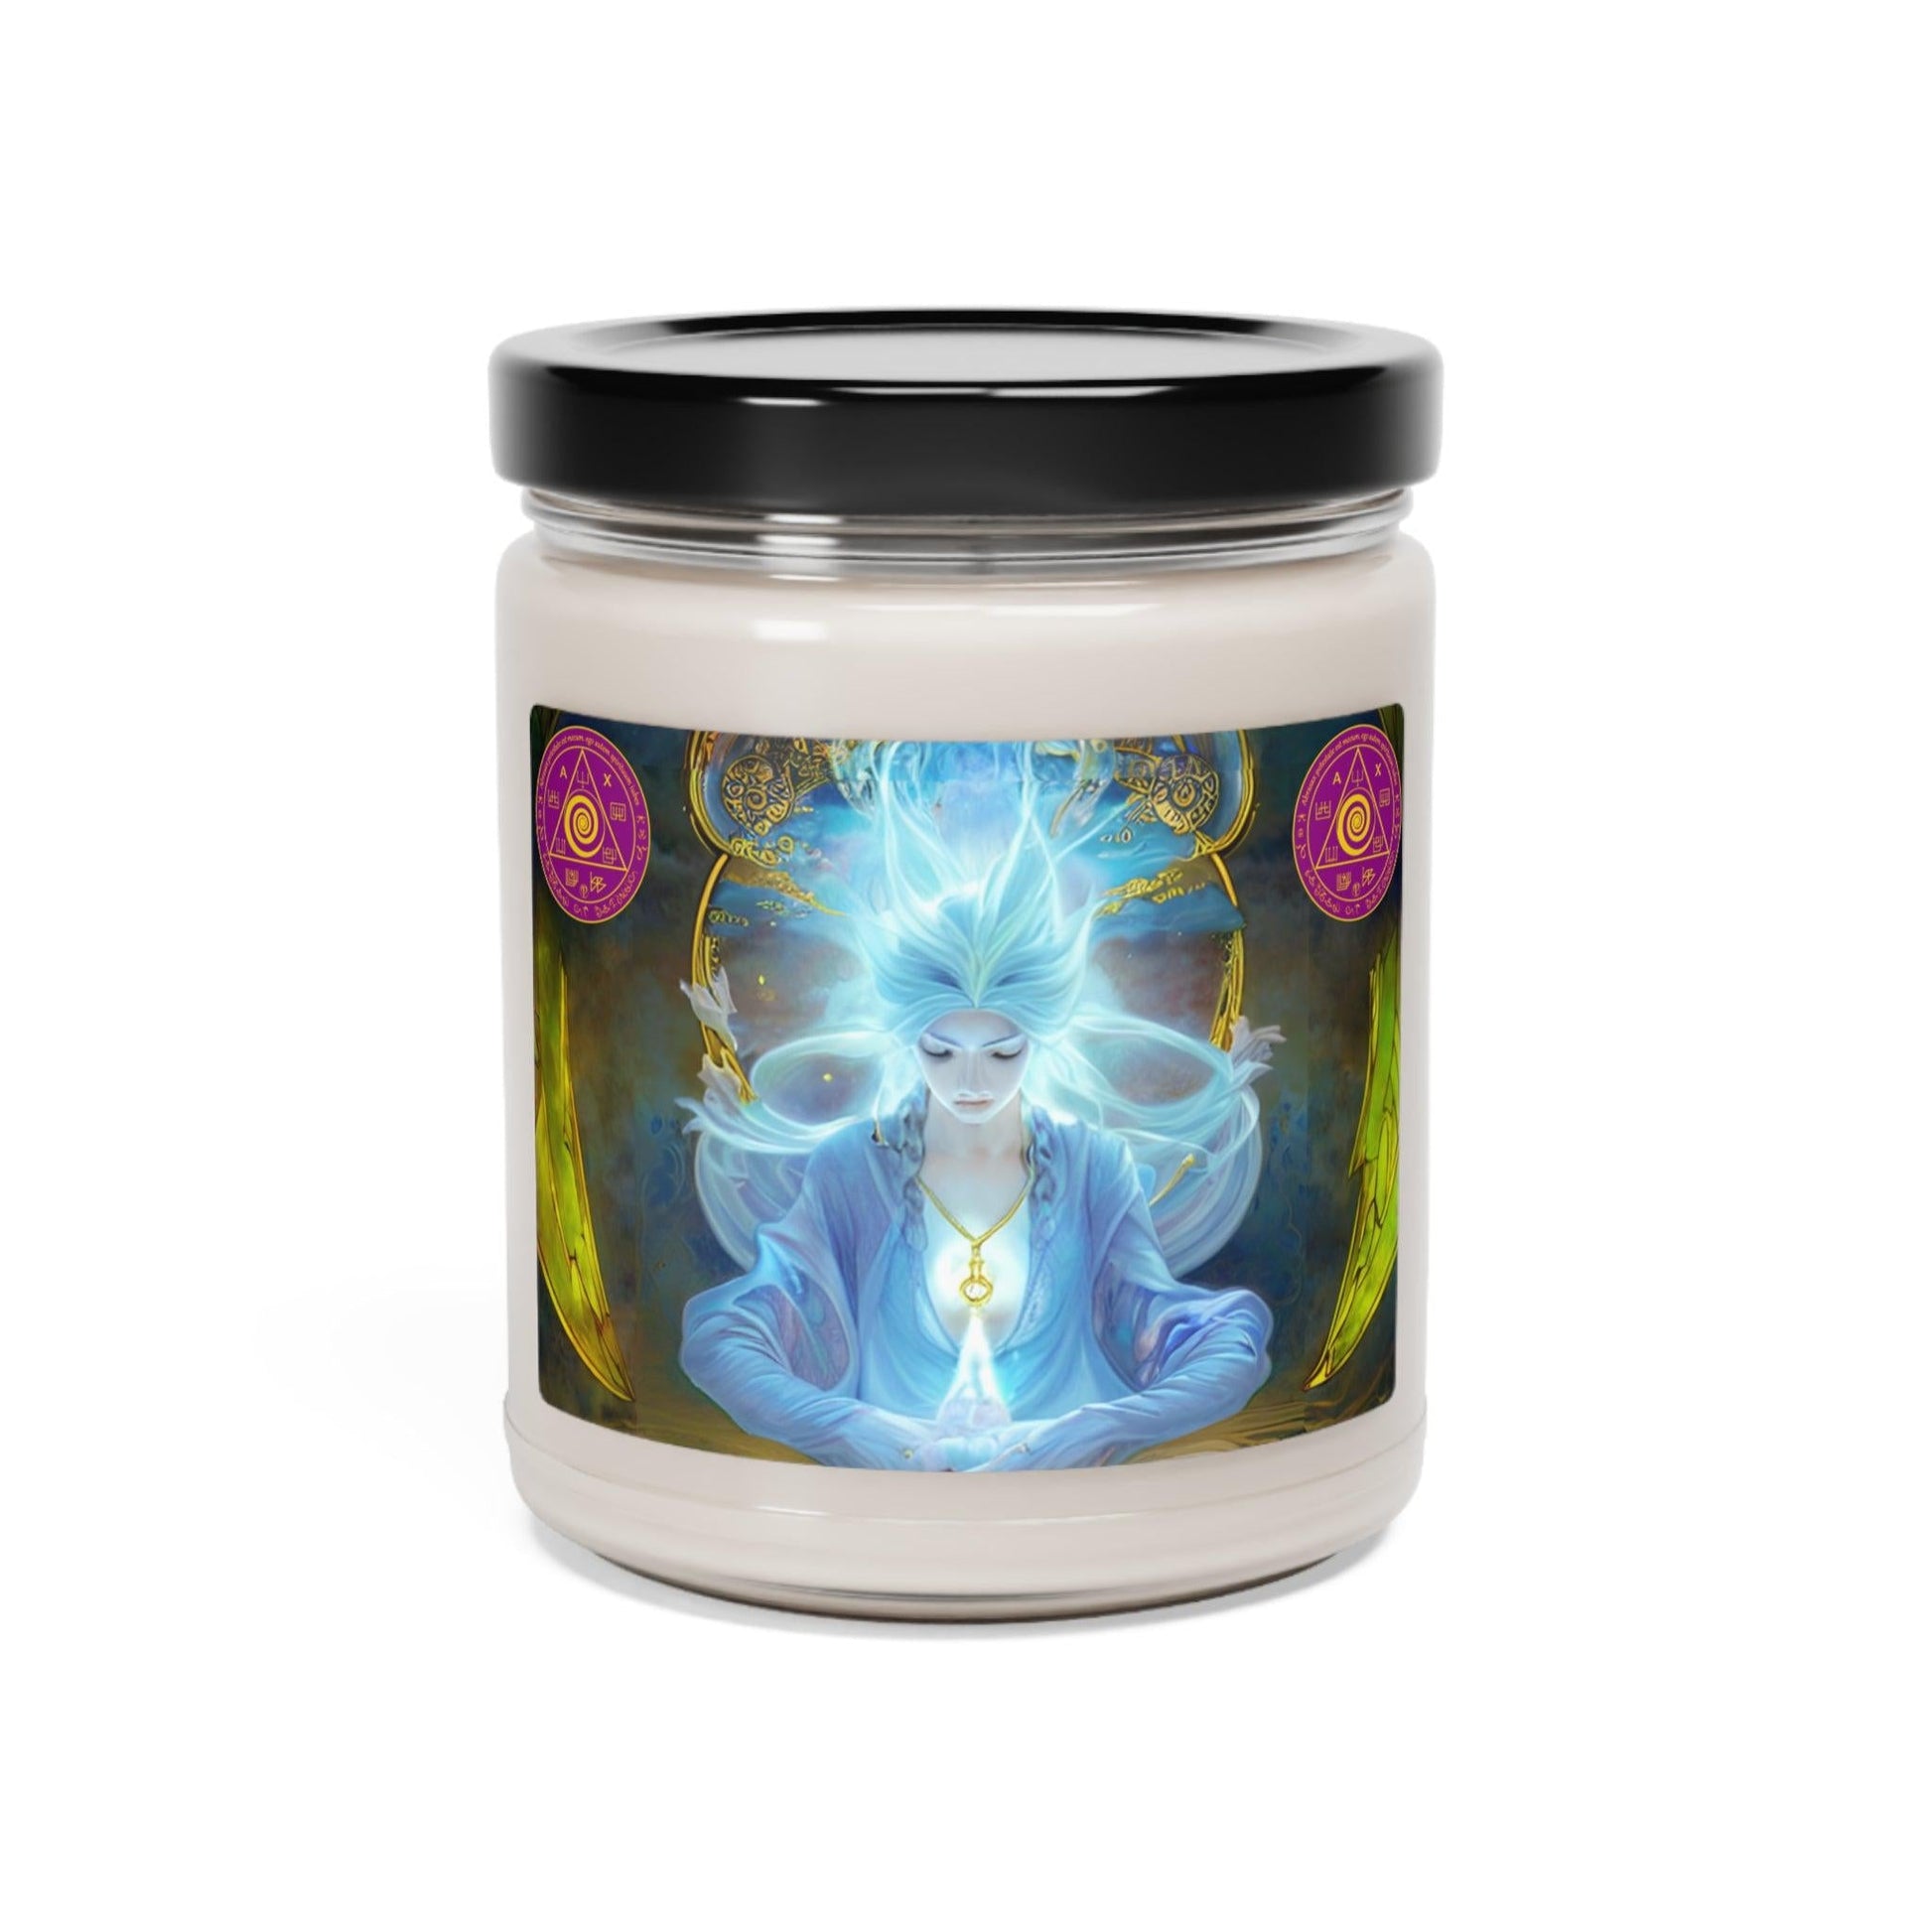 Olympic-Spirits-Cleansing-and-Protection-Scented-Soy-Candle-for-offerings-rituals-initiations-or-praying-and-meditation-11